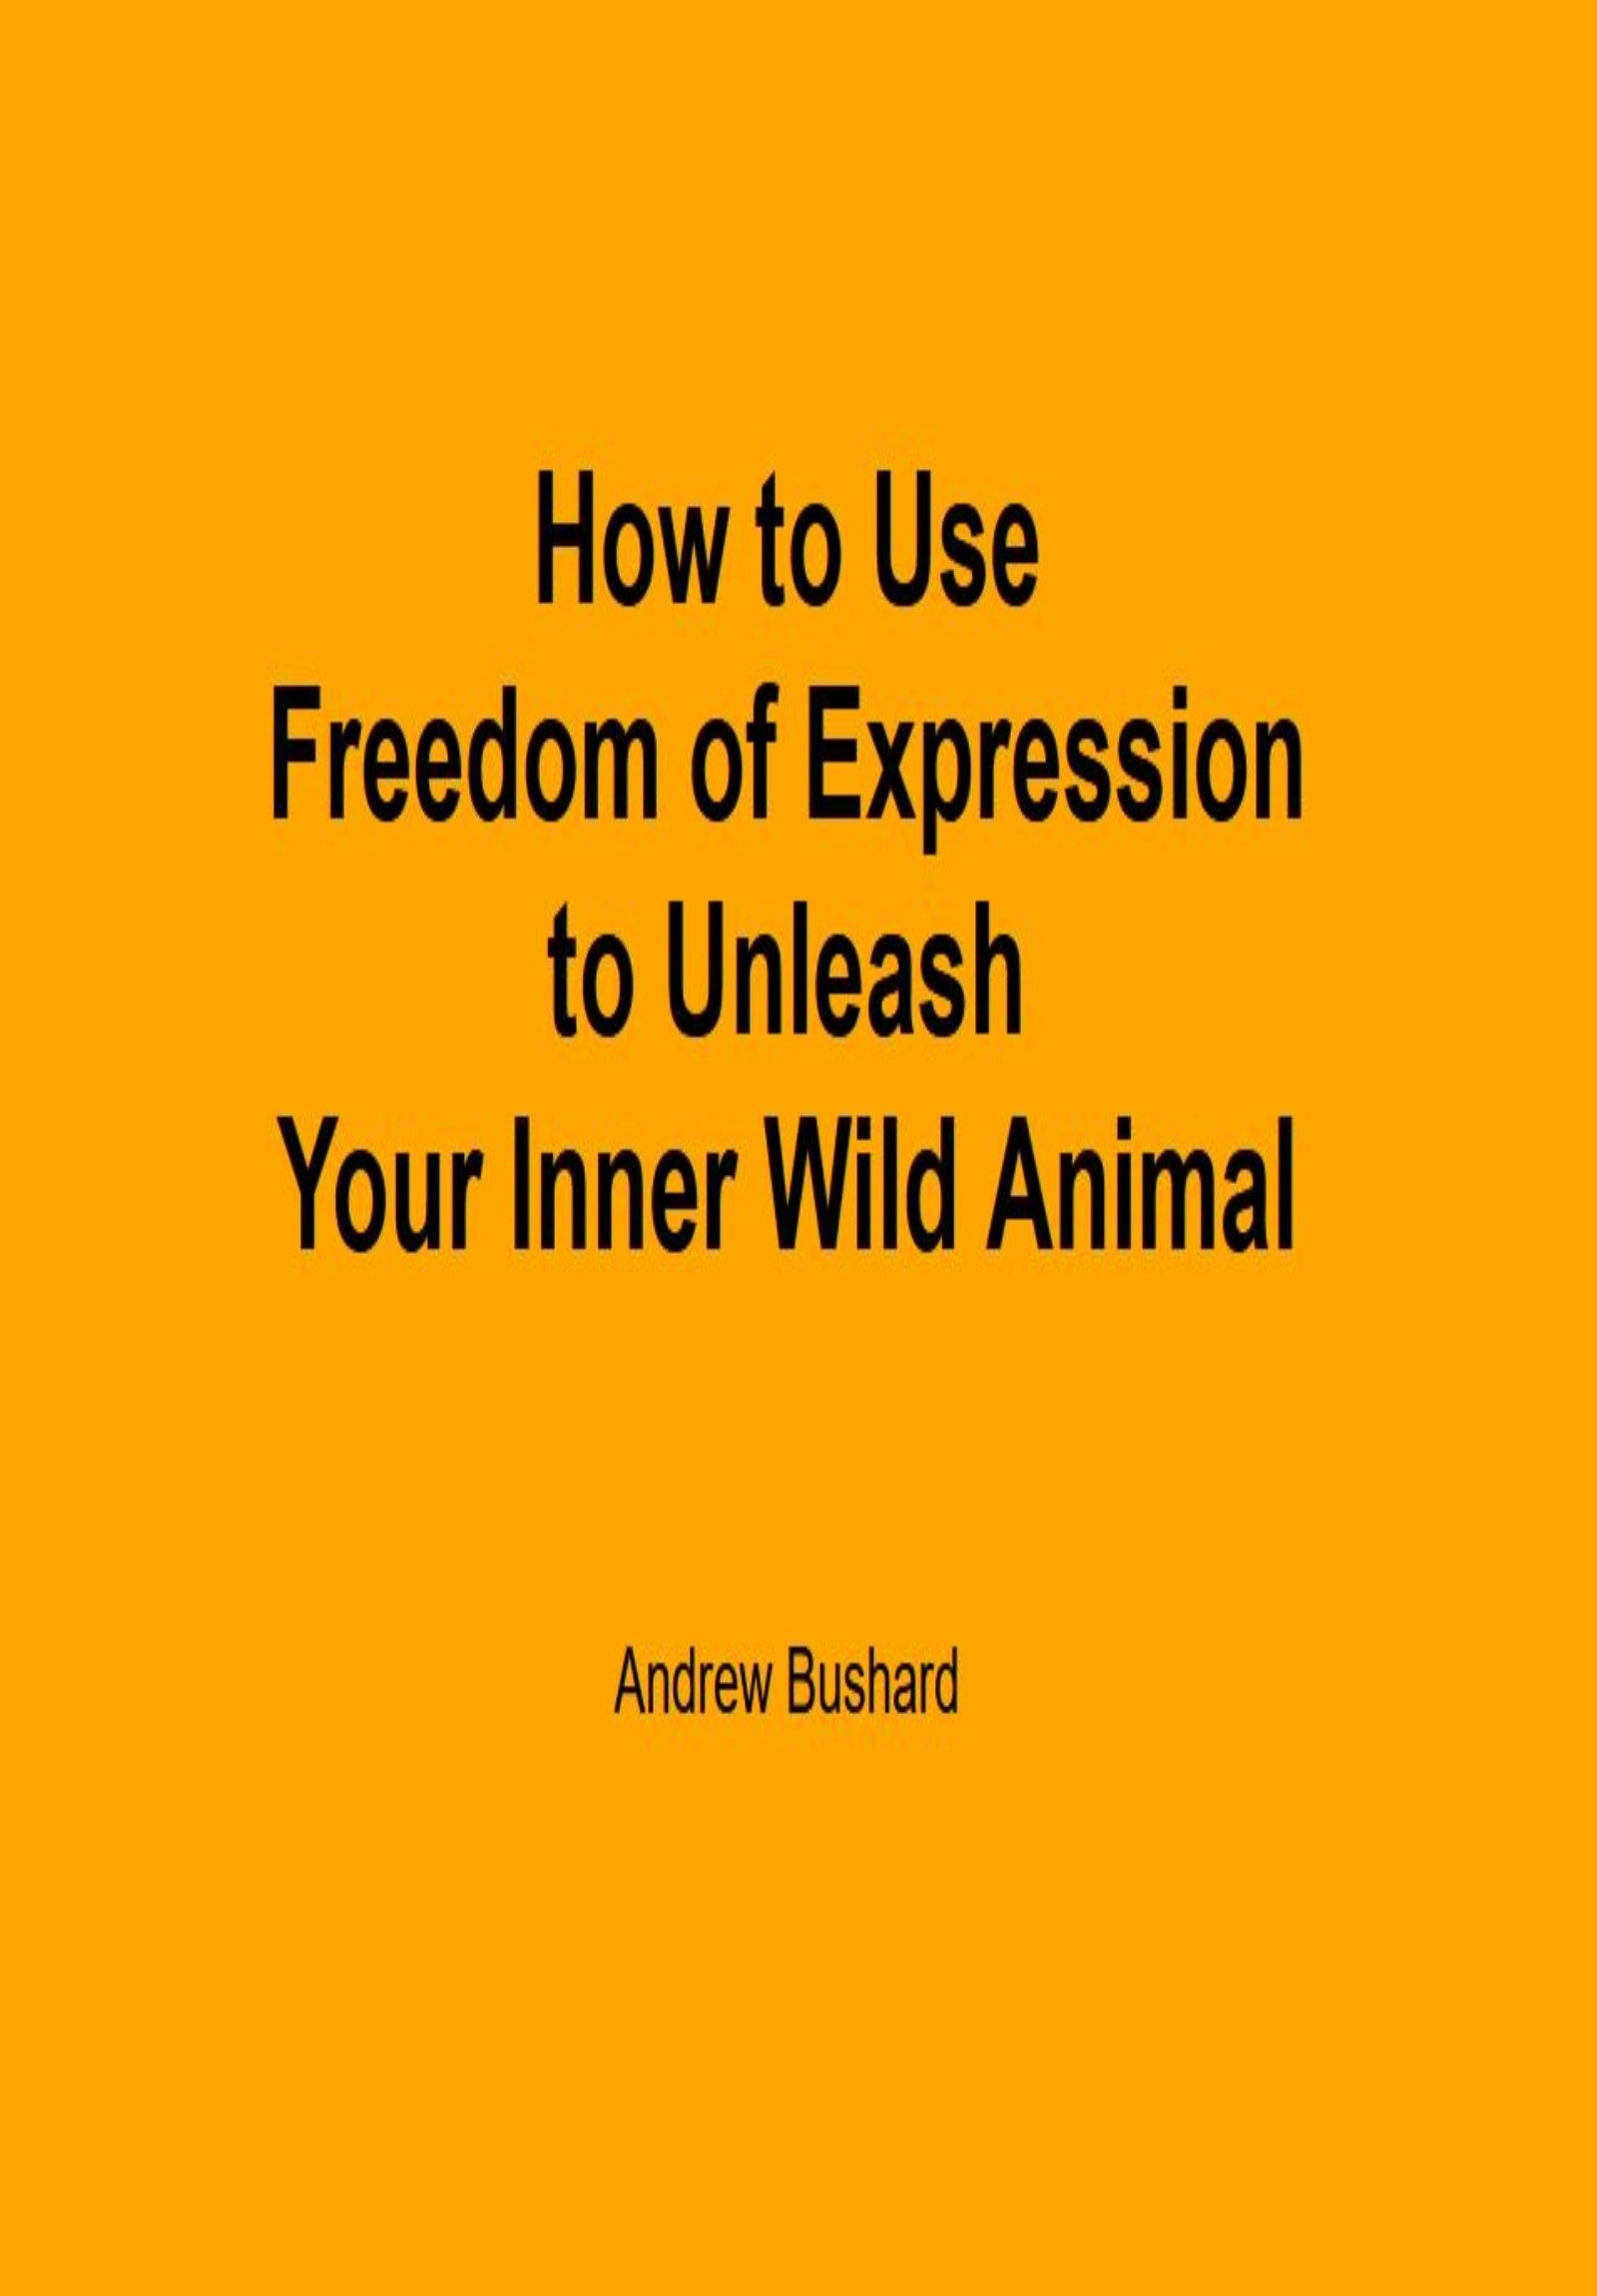 How to Use Freedom of Expression